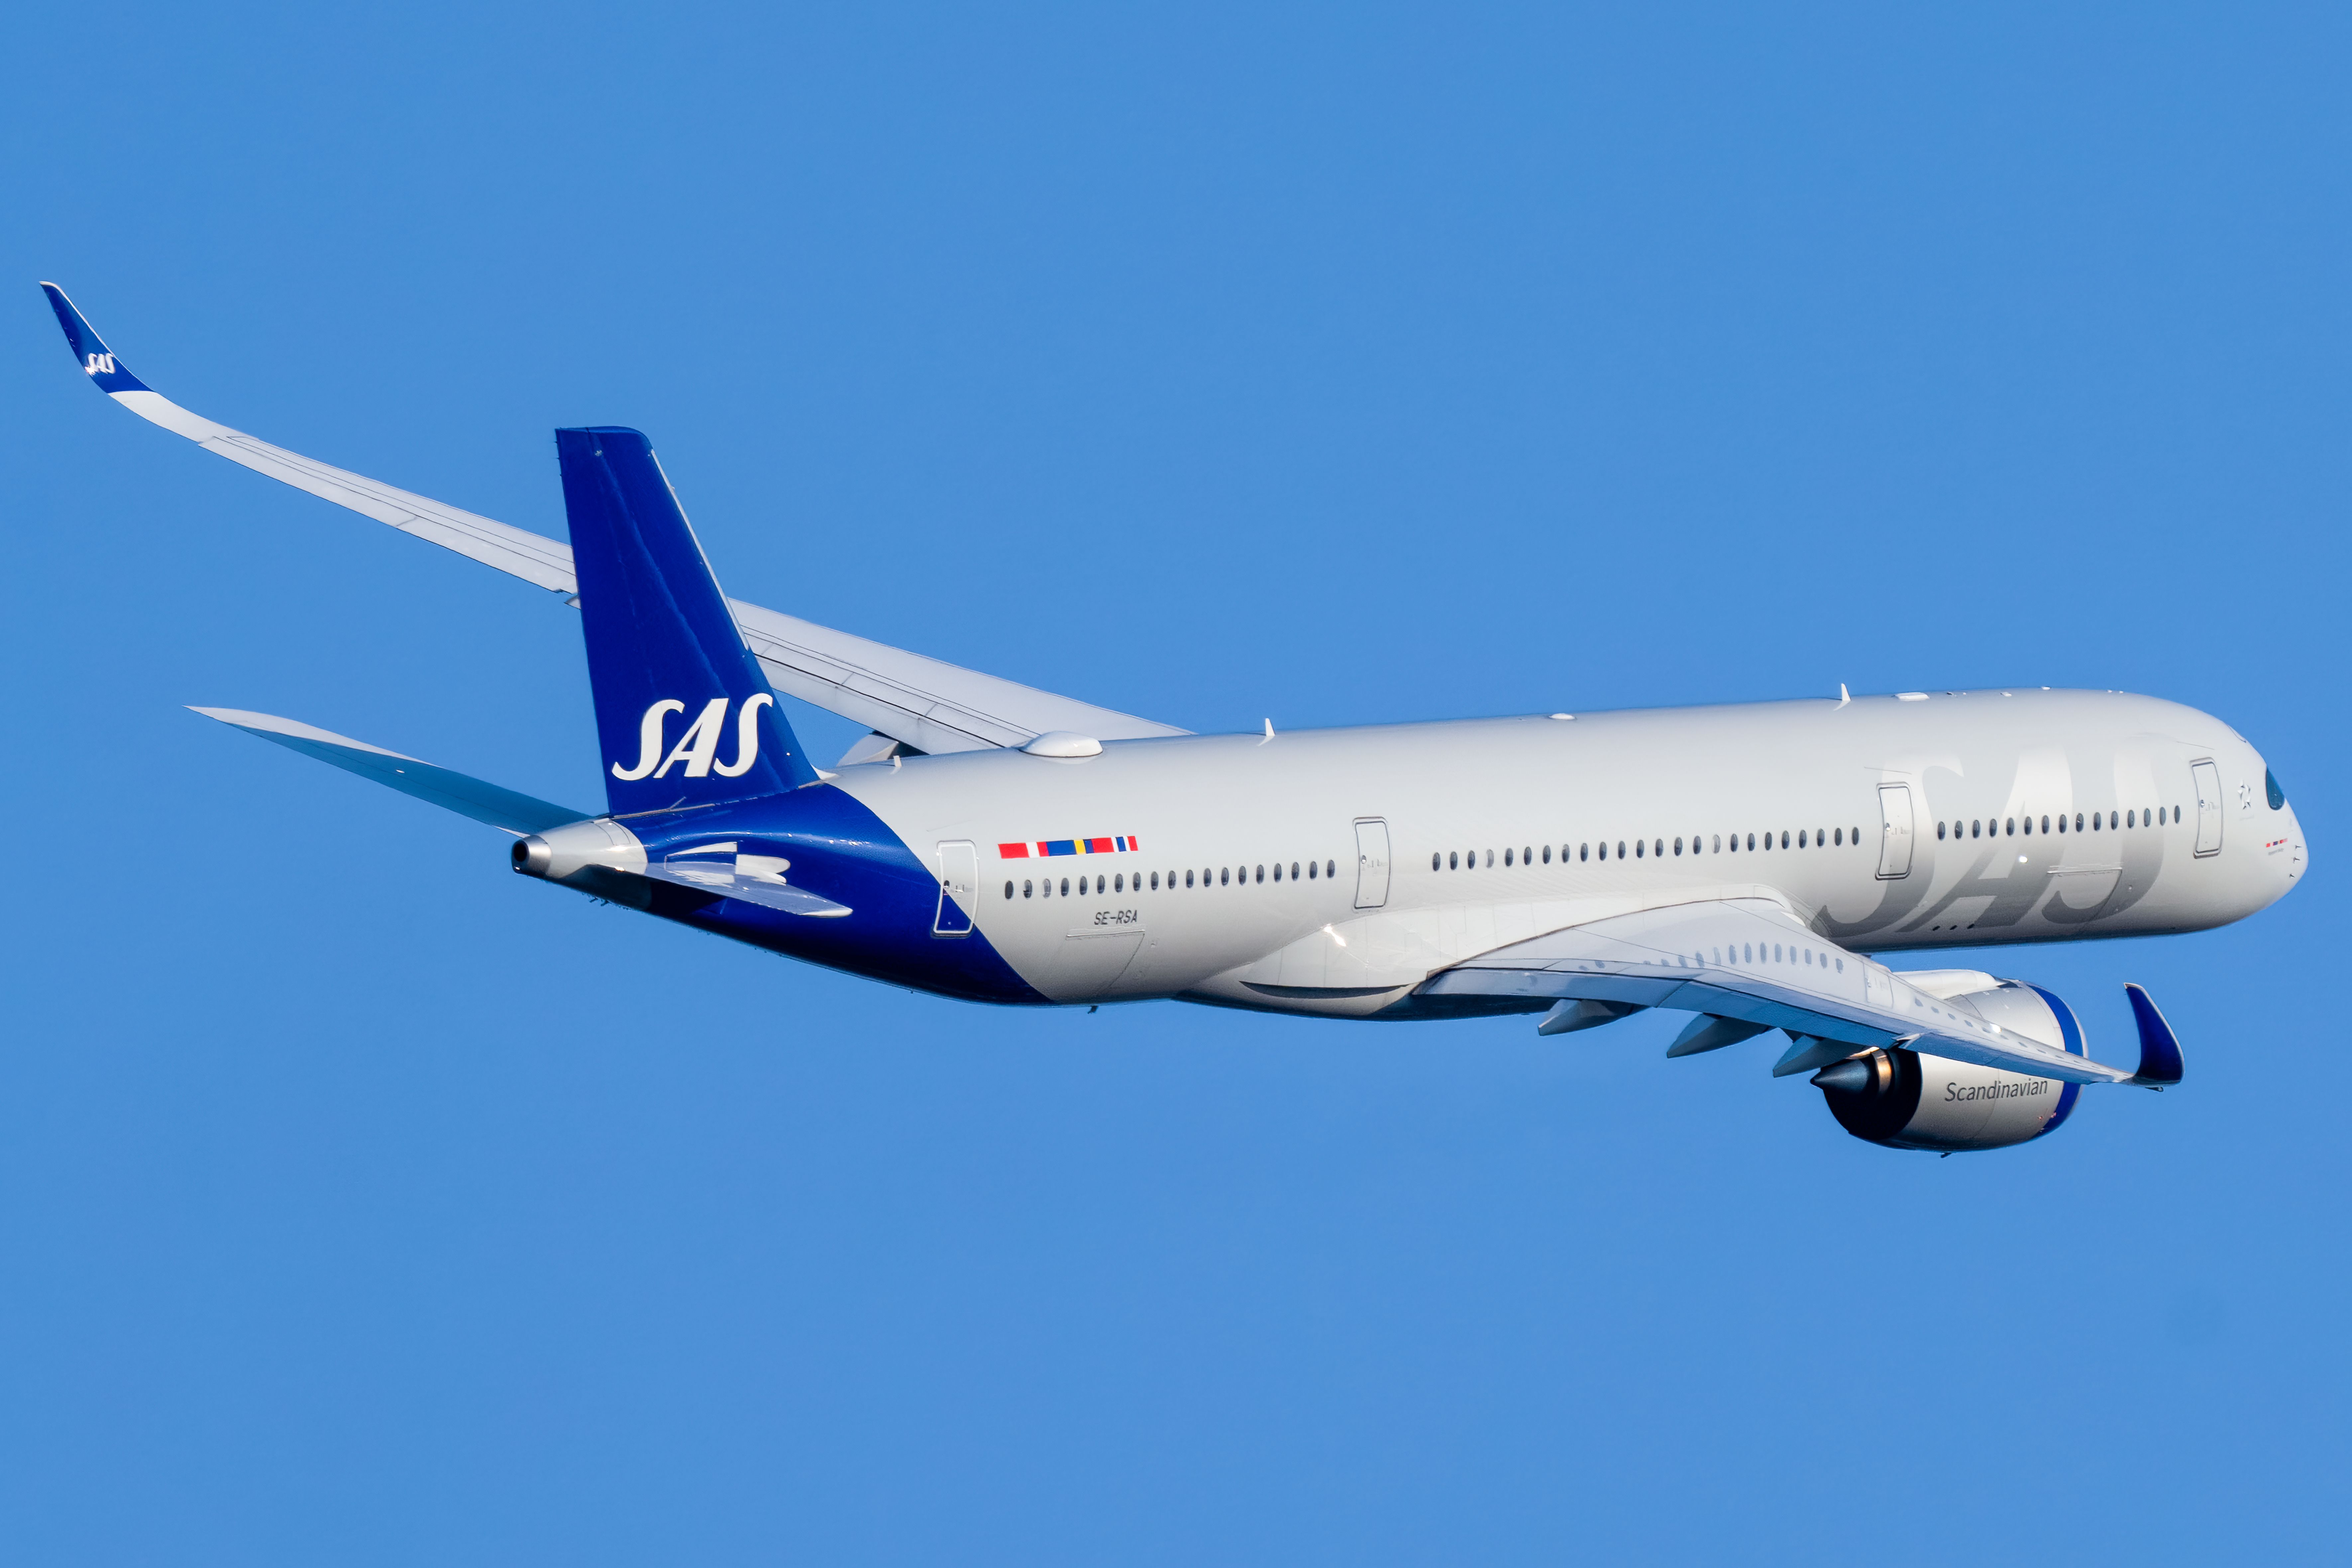 An SAS Airbus A350-900 flying in the sky.